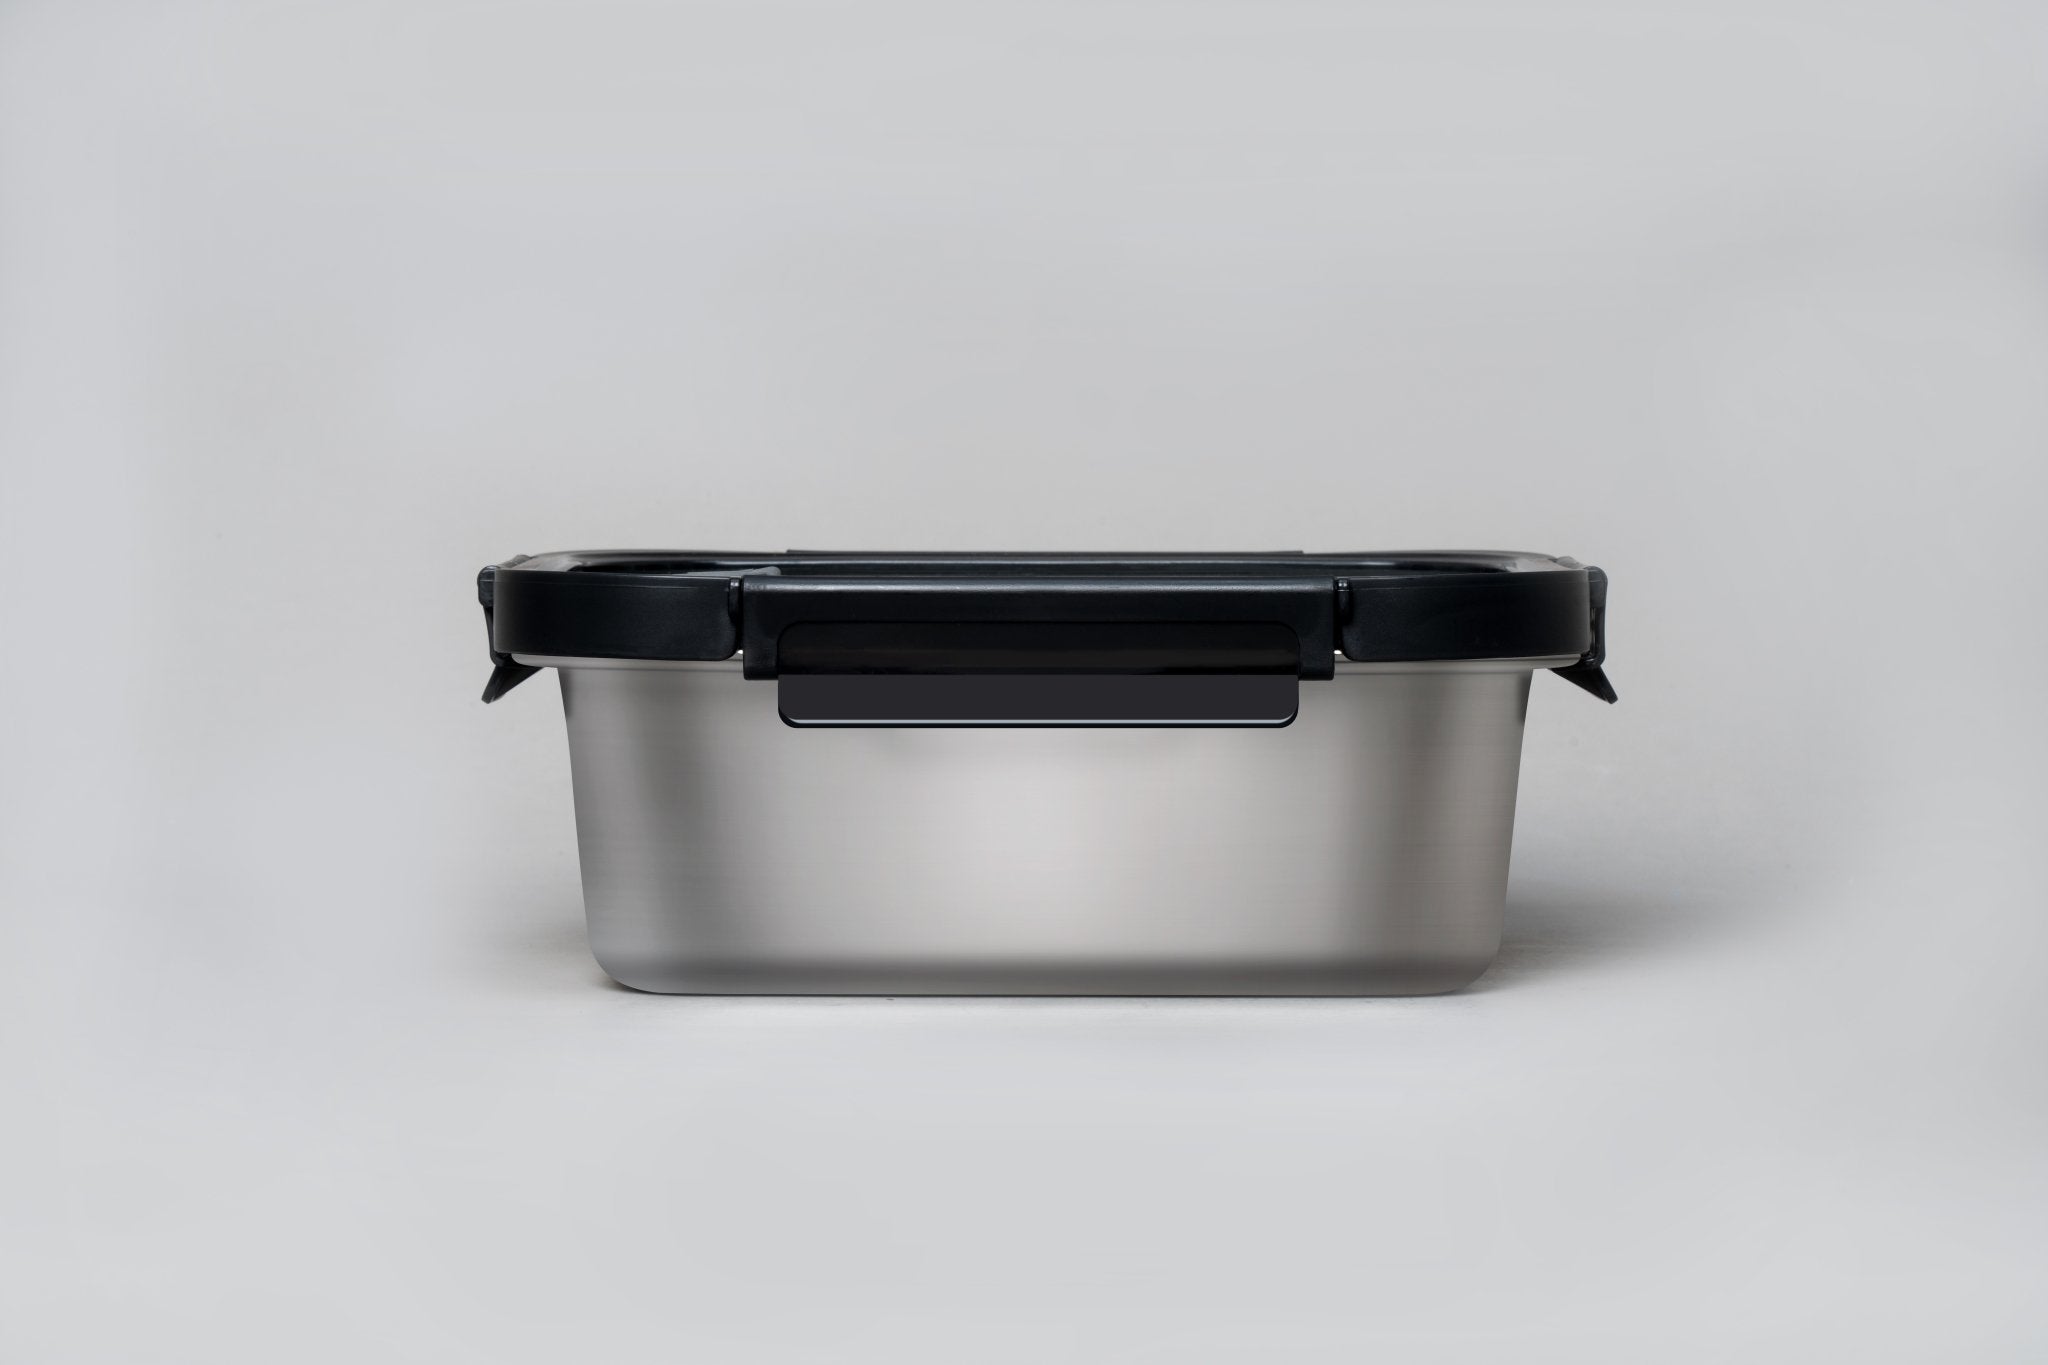 https://genicook.com/cdn/shop/products/rectangular-microwave-safe-stainless-steel-container-800-1200-or-1800-mlgenicooksiv800rc-bk-946389.jpg?v=1699599722